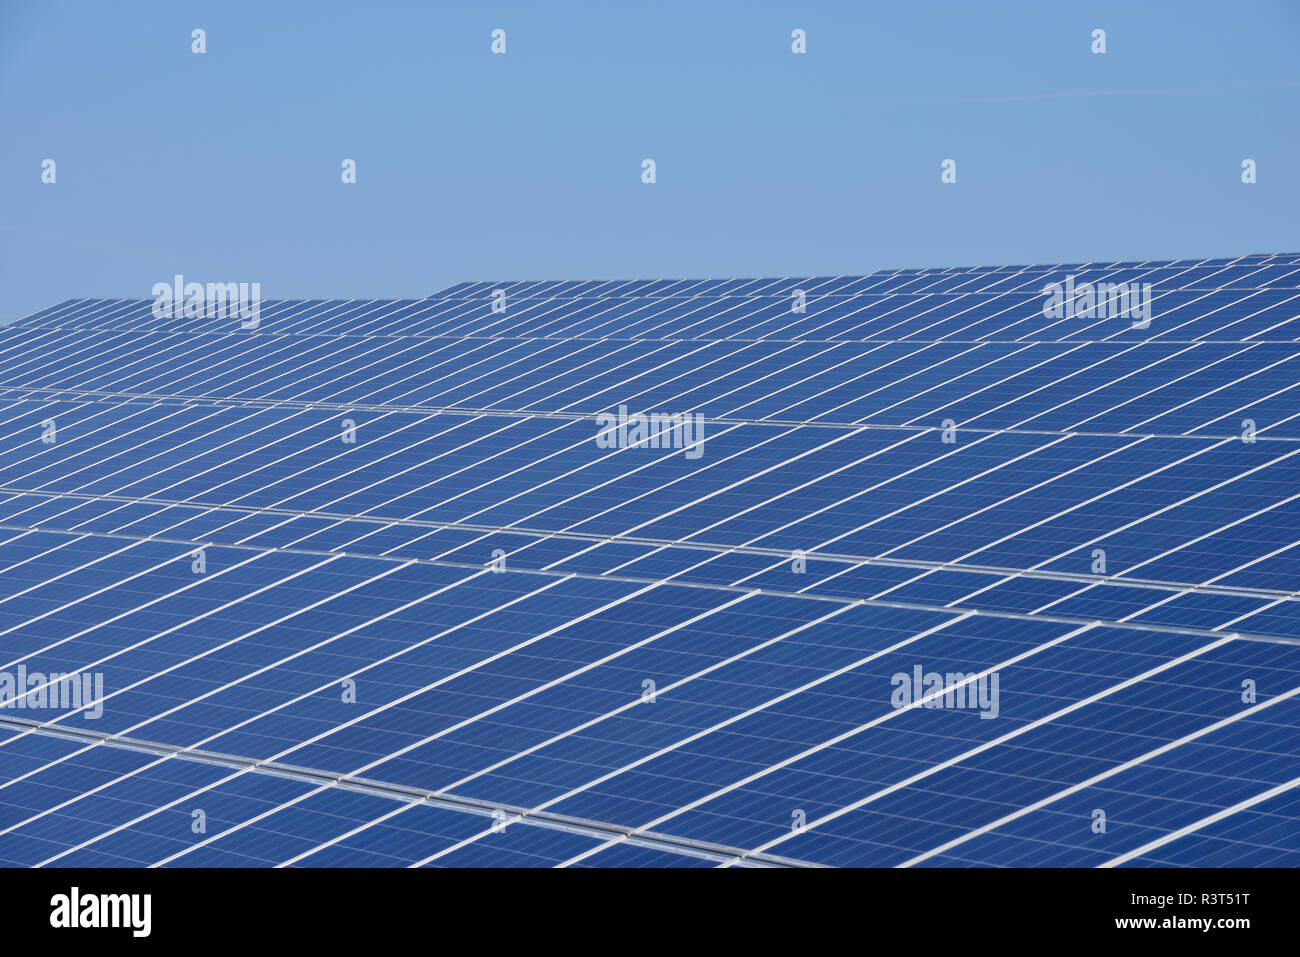 Germany, View of large number of solar panels at solar plant field Stock Photo